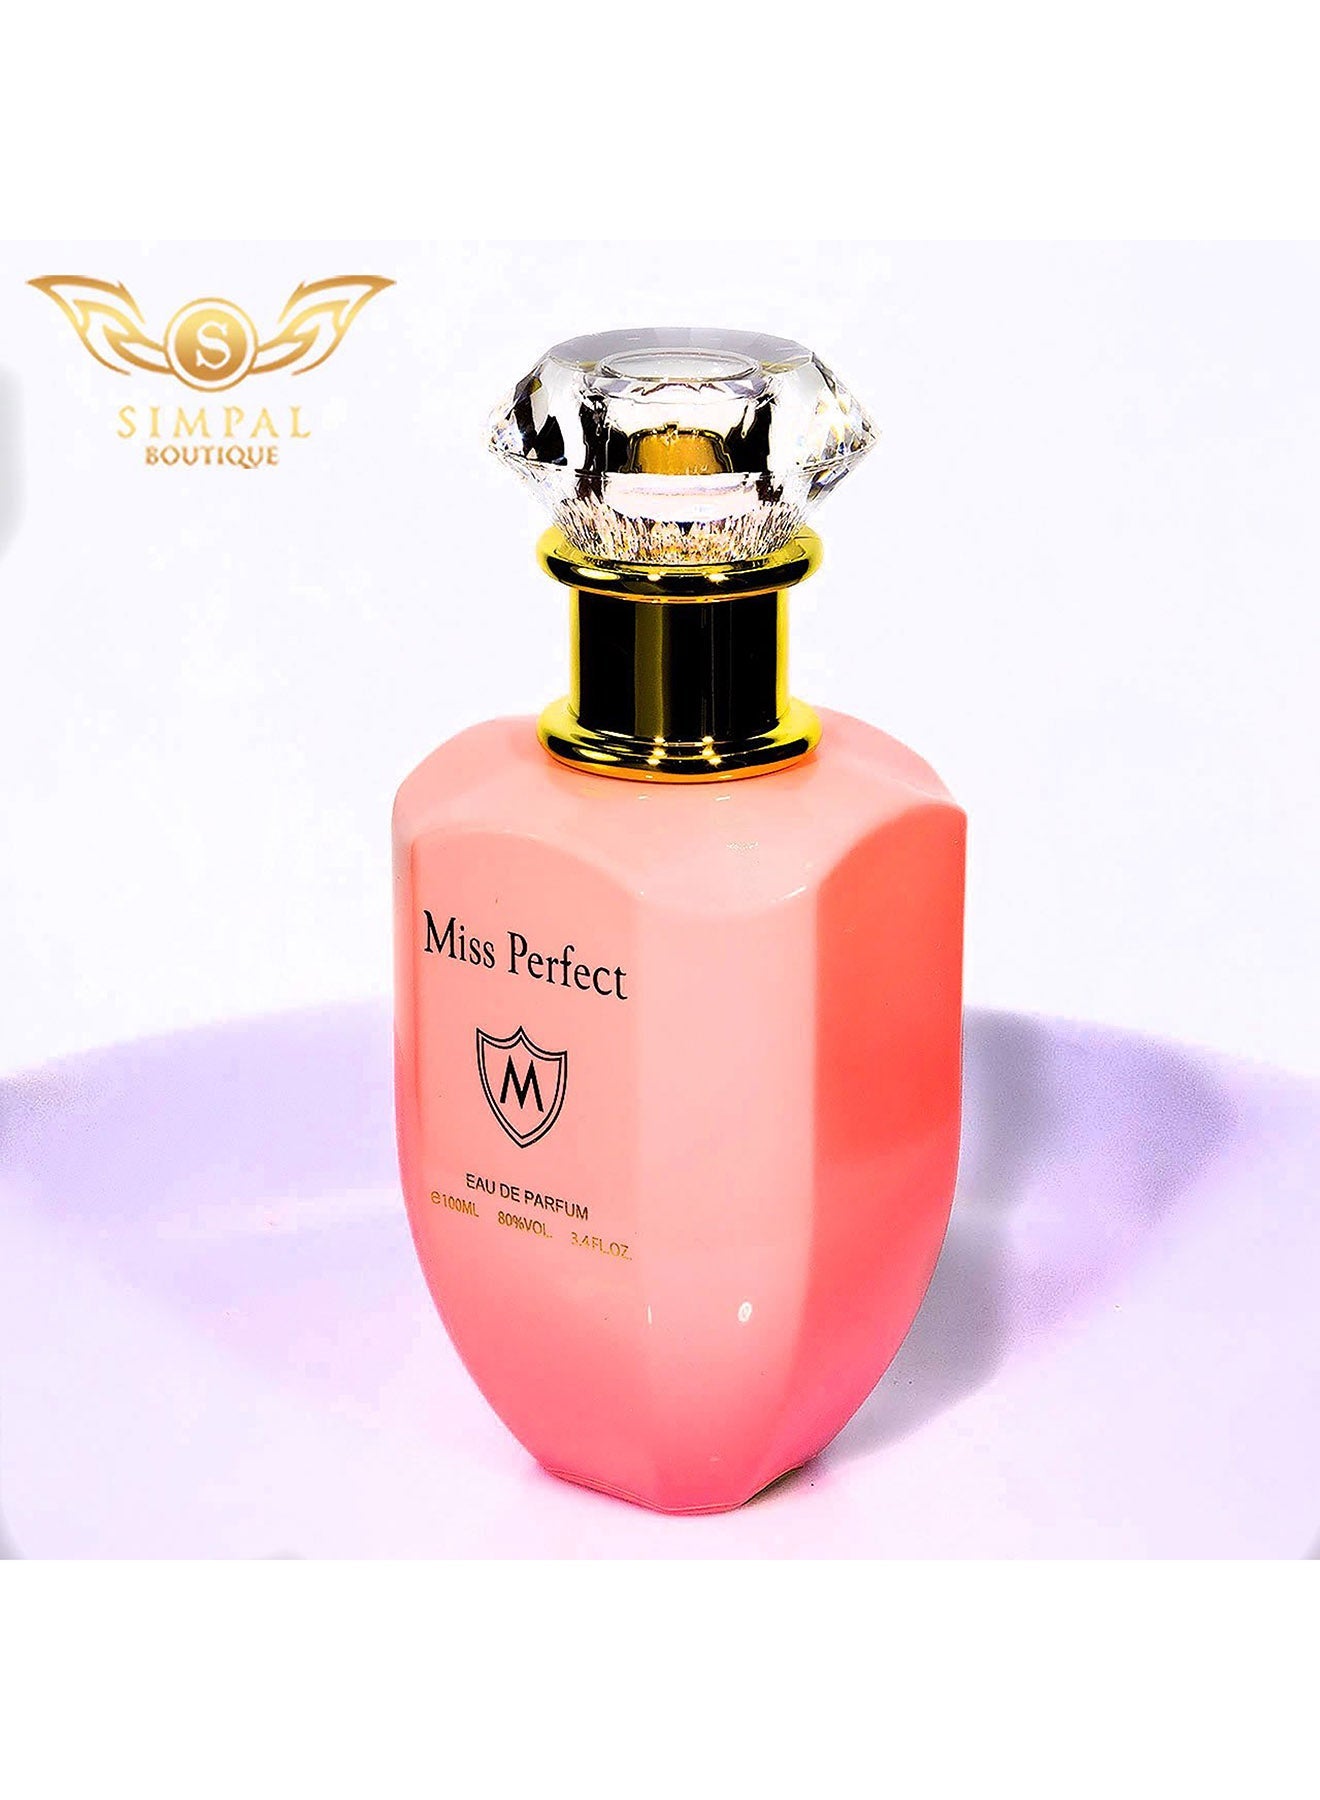 Miss Perfect Eau de Parfum Made in France 100 ml Value Pack of 2